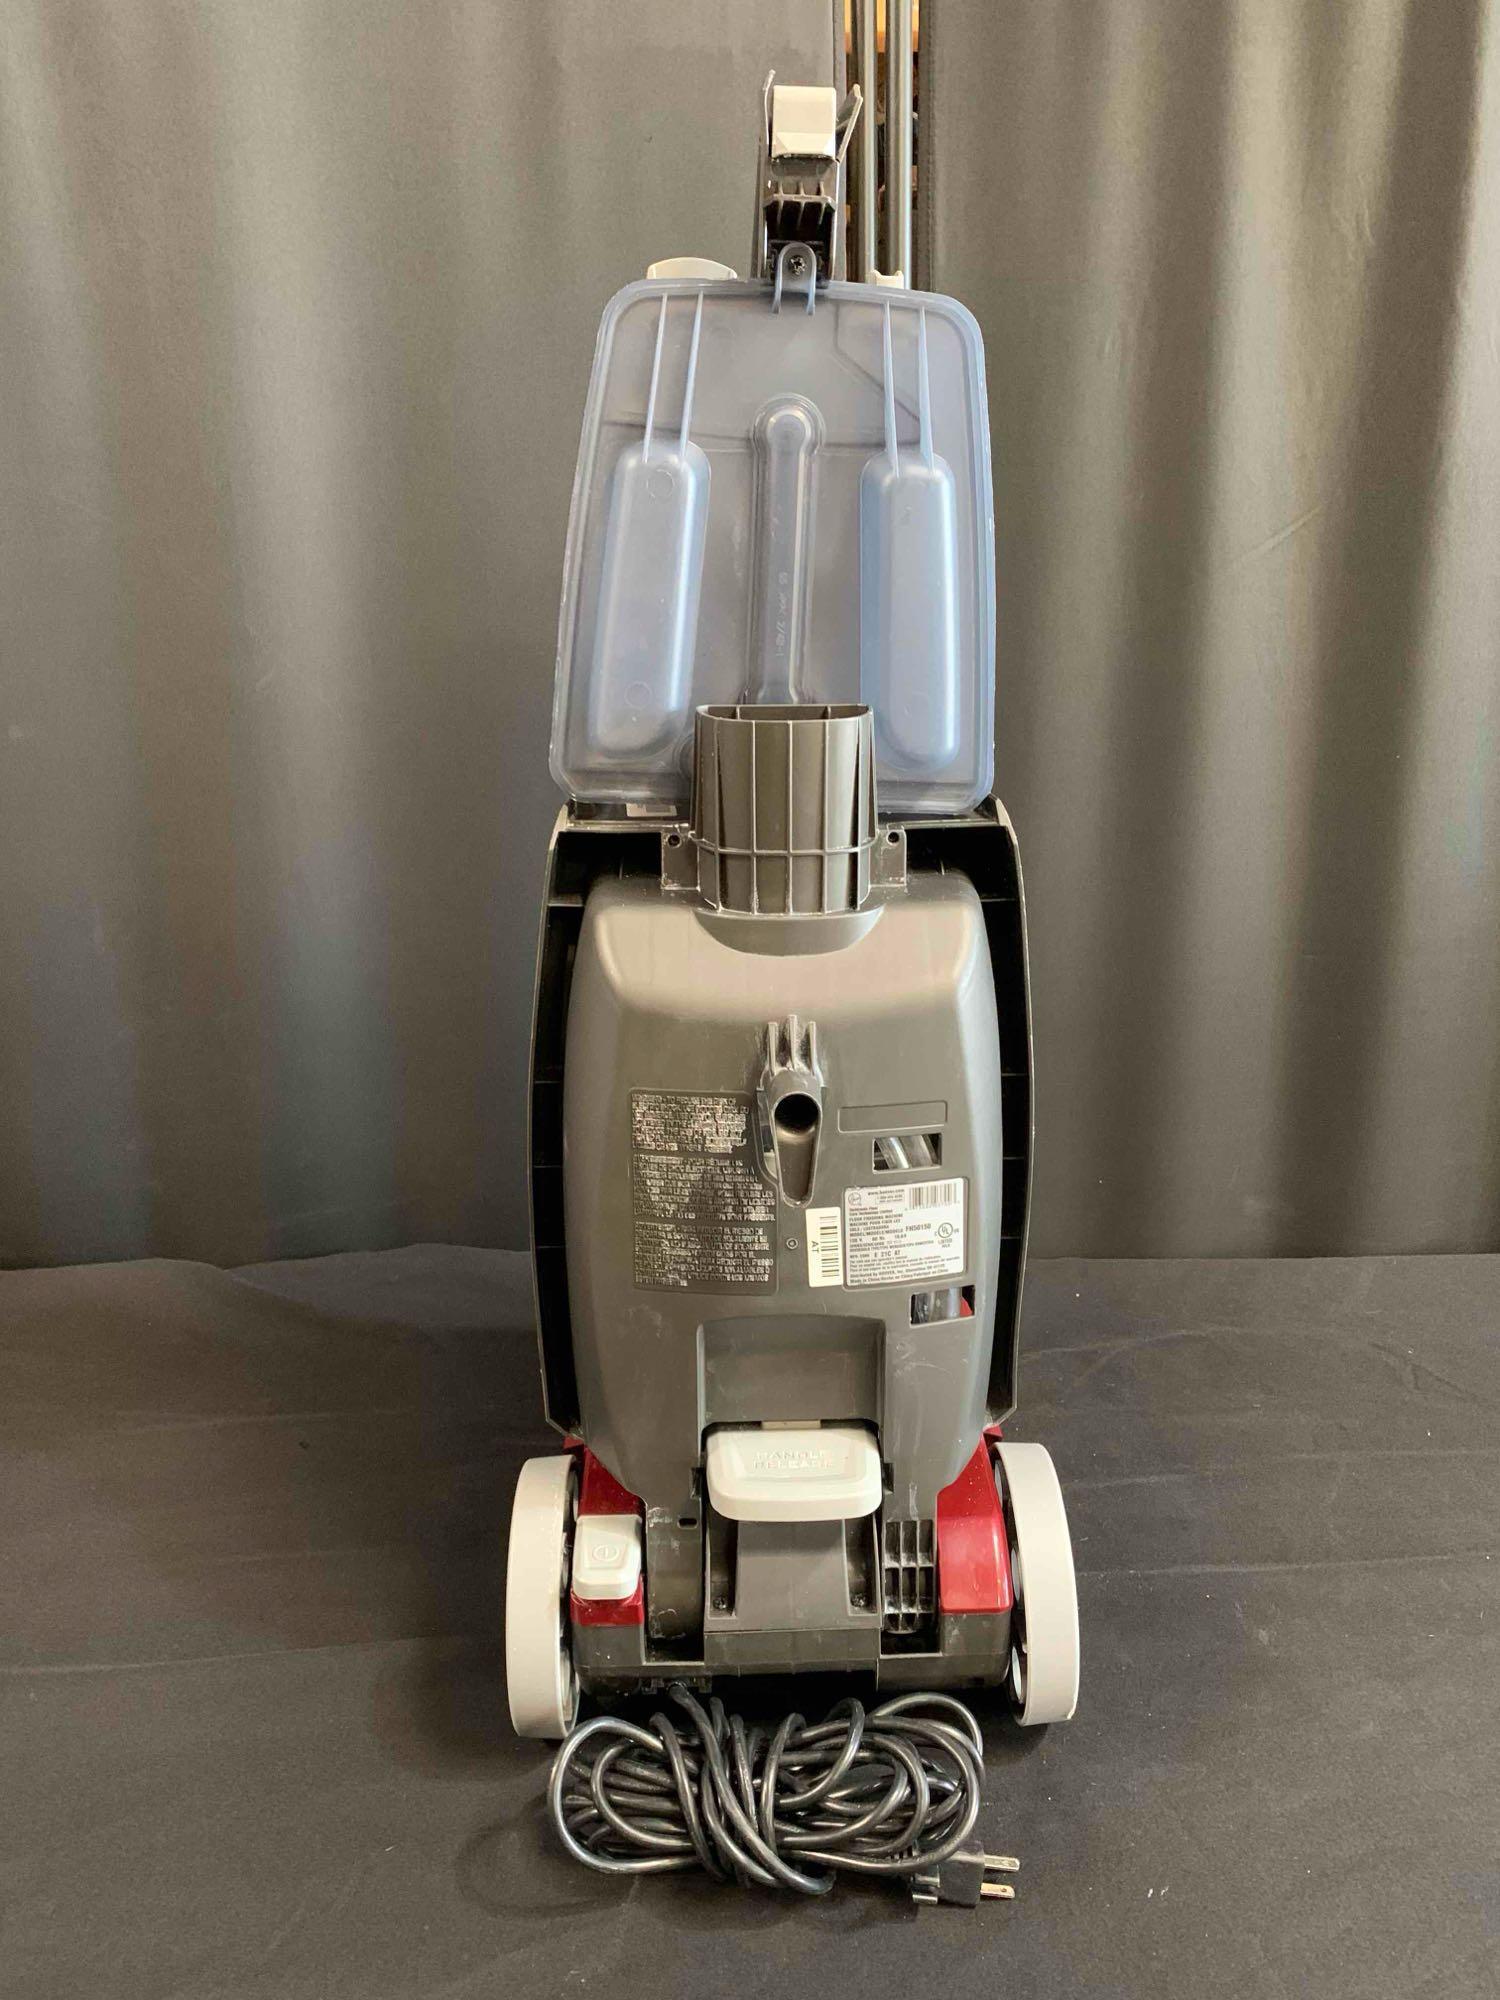 Hoover PowerScrub Deluxe Carpet Cleaner Machine, for Carpet and Upholstery